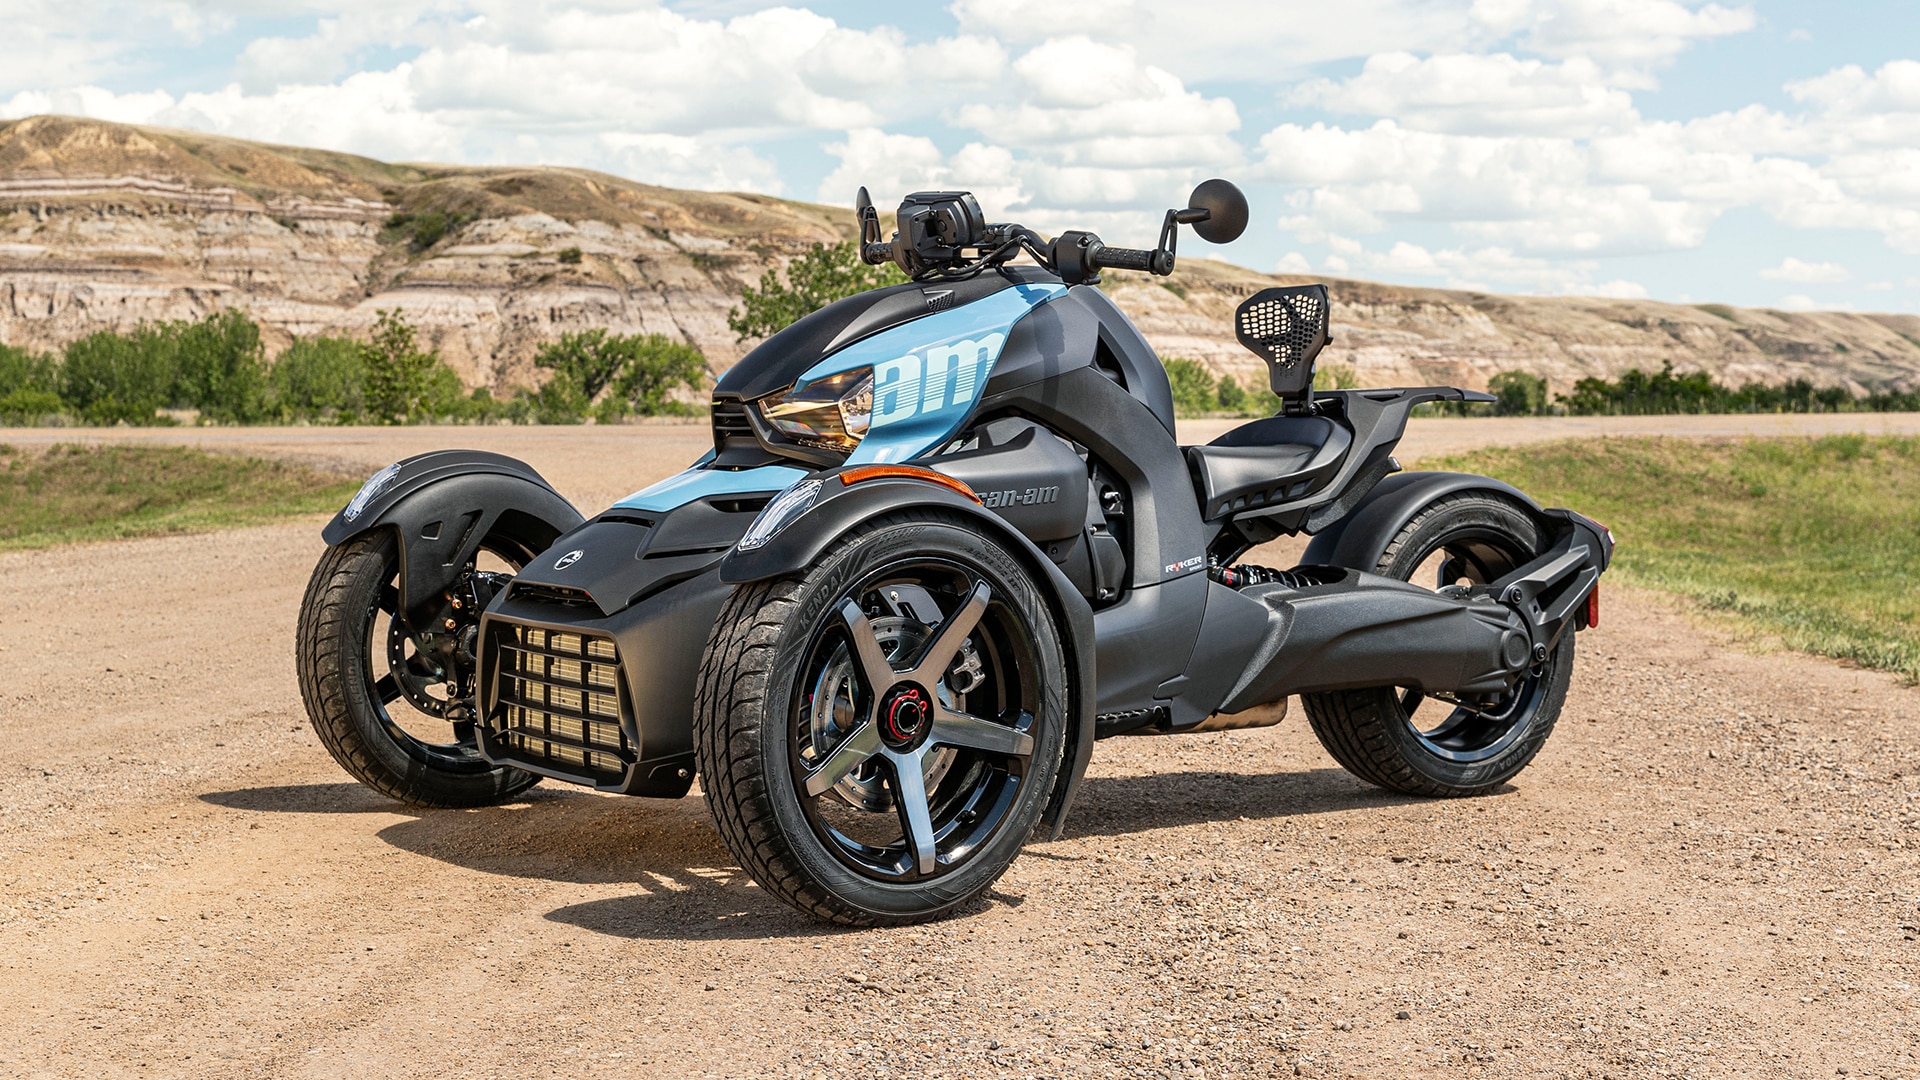 Side View of a Can-Am Ryker on a dirt road